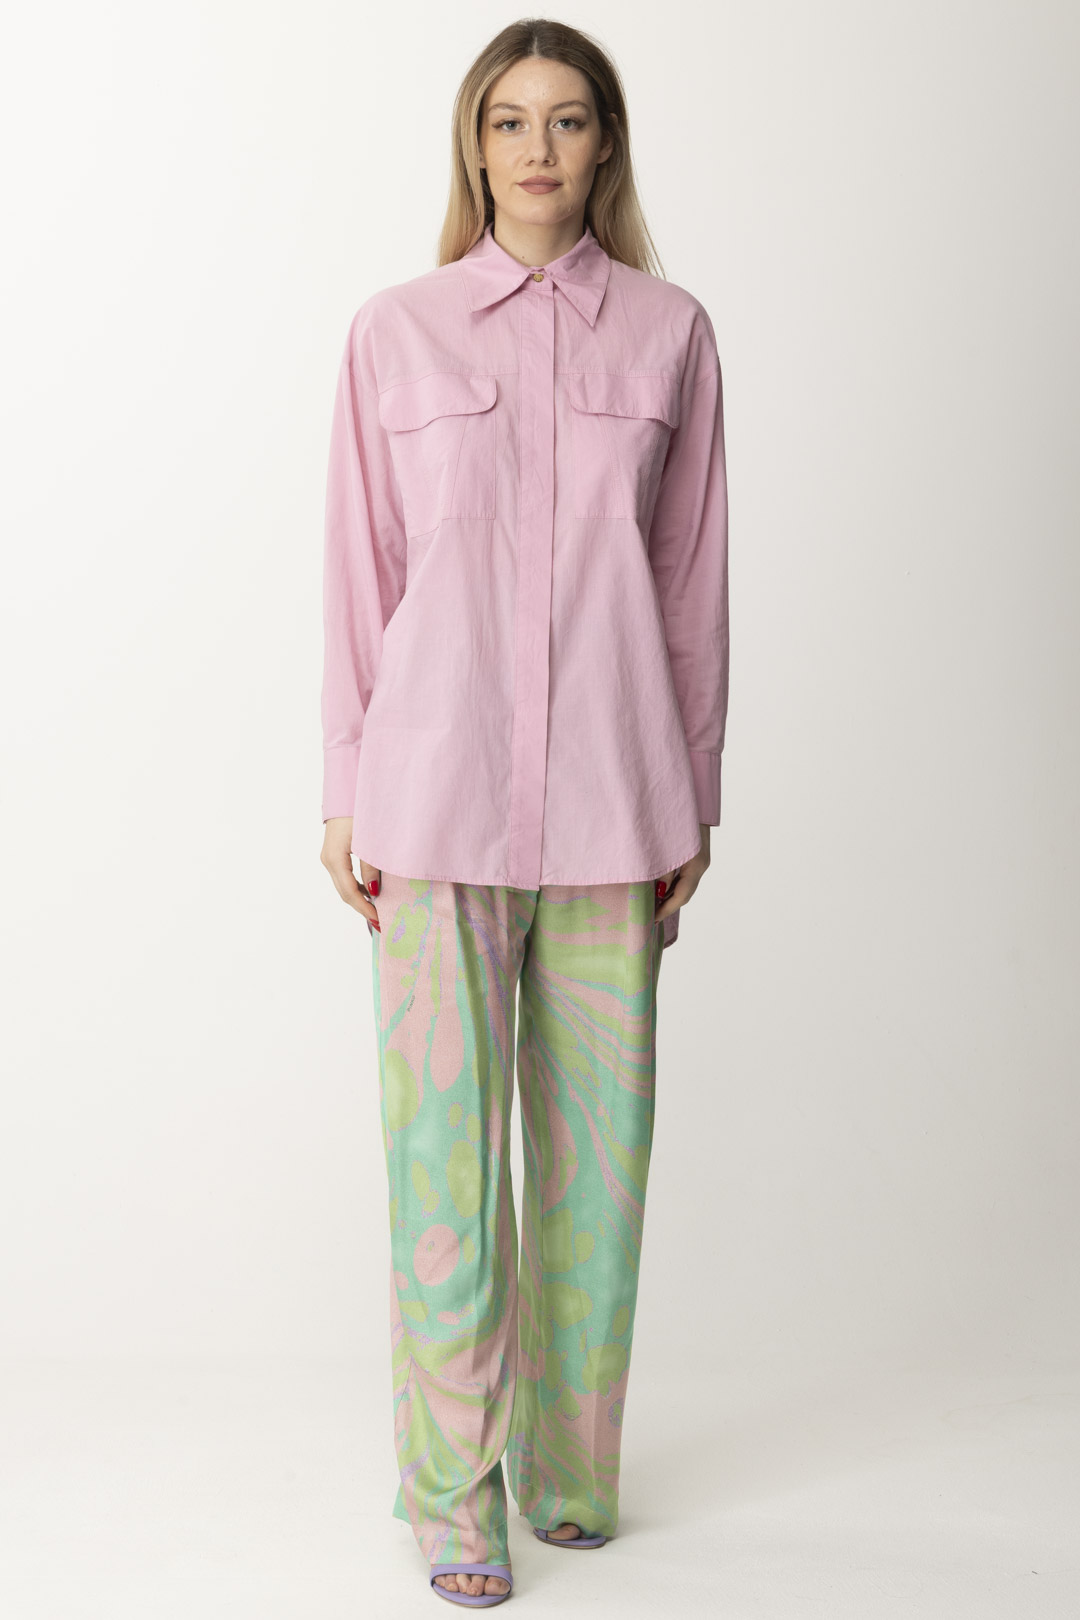 Preview: Pinko Wide printed trousers MULT VERDE/ROSA